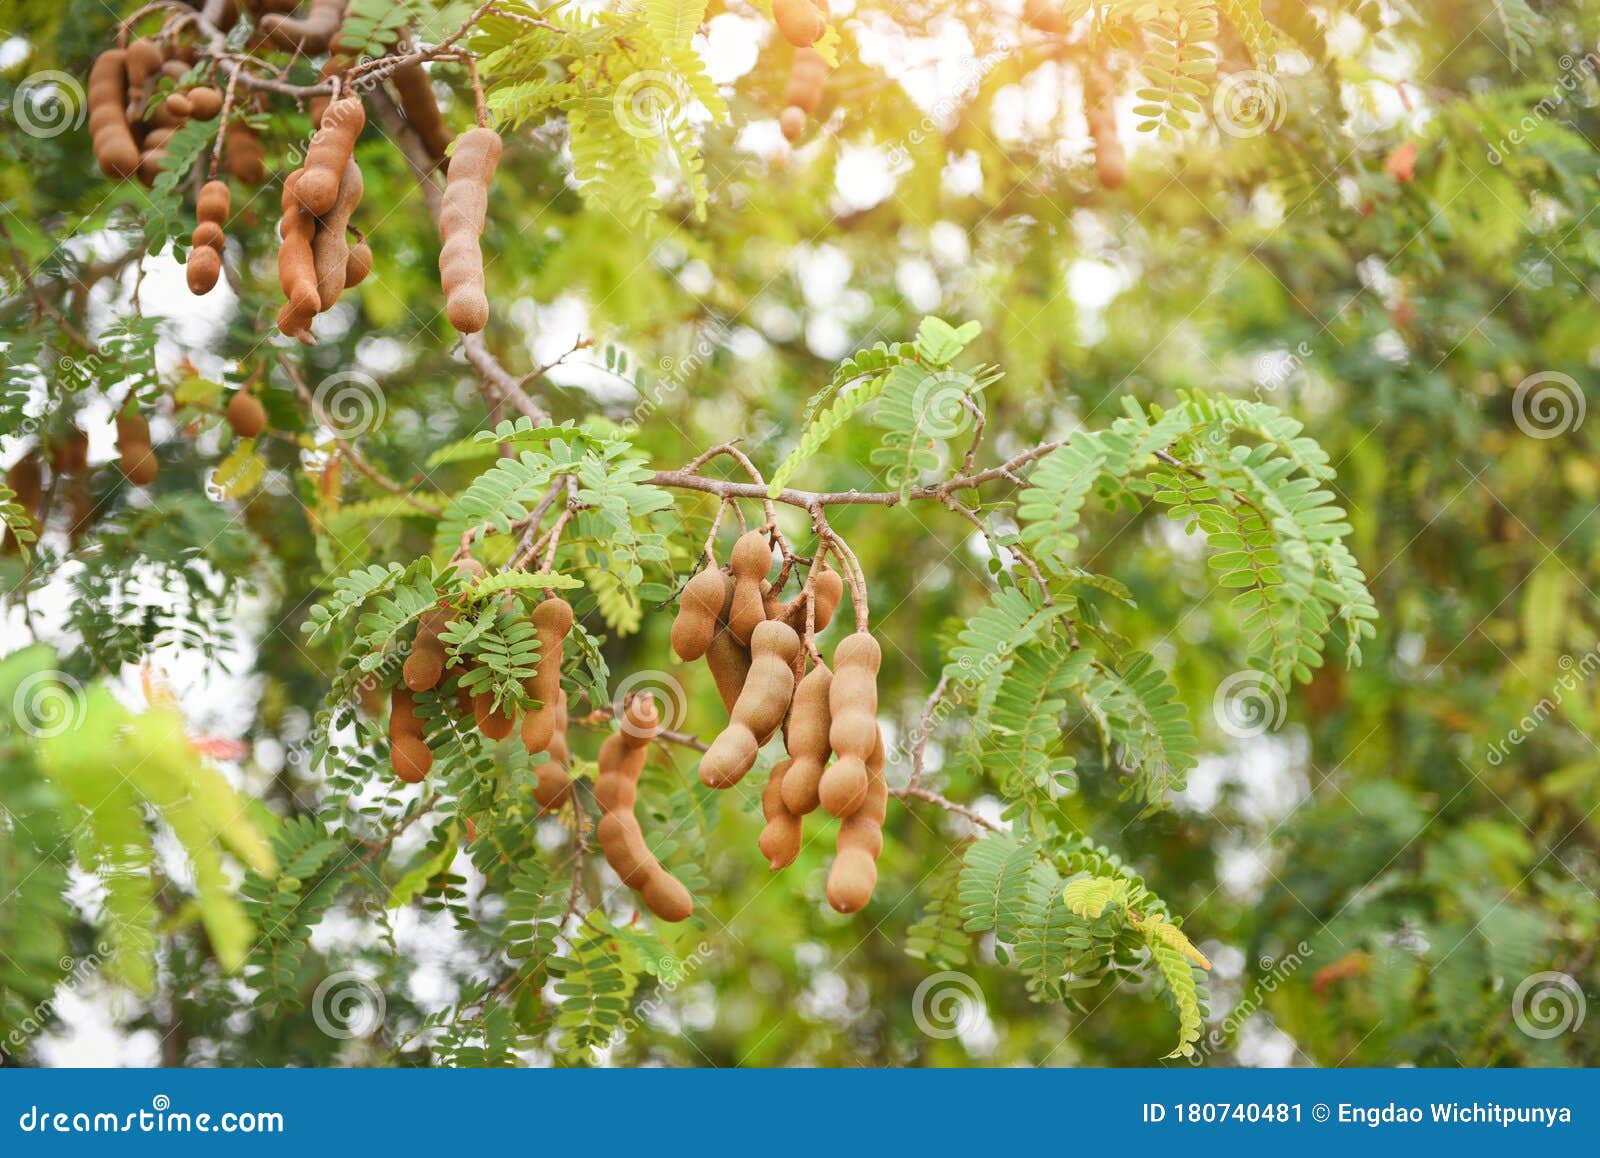 604 Tamarind Fruit Tree Leaves Photos Free Royalty Free Stock Photos From Dreamstime